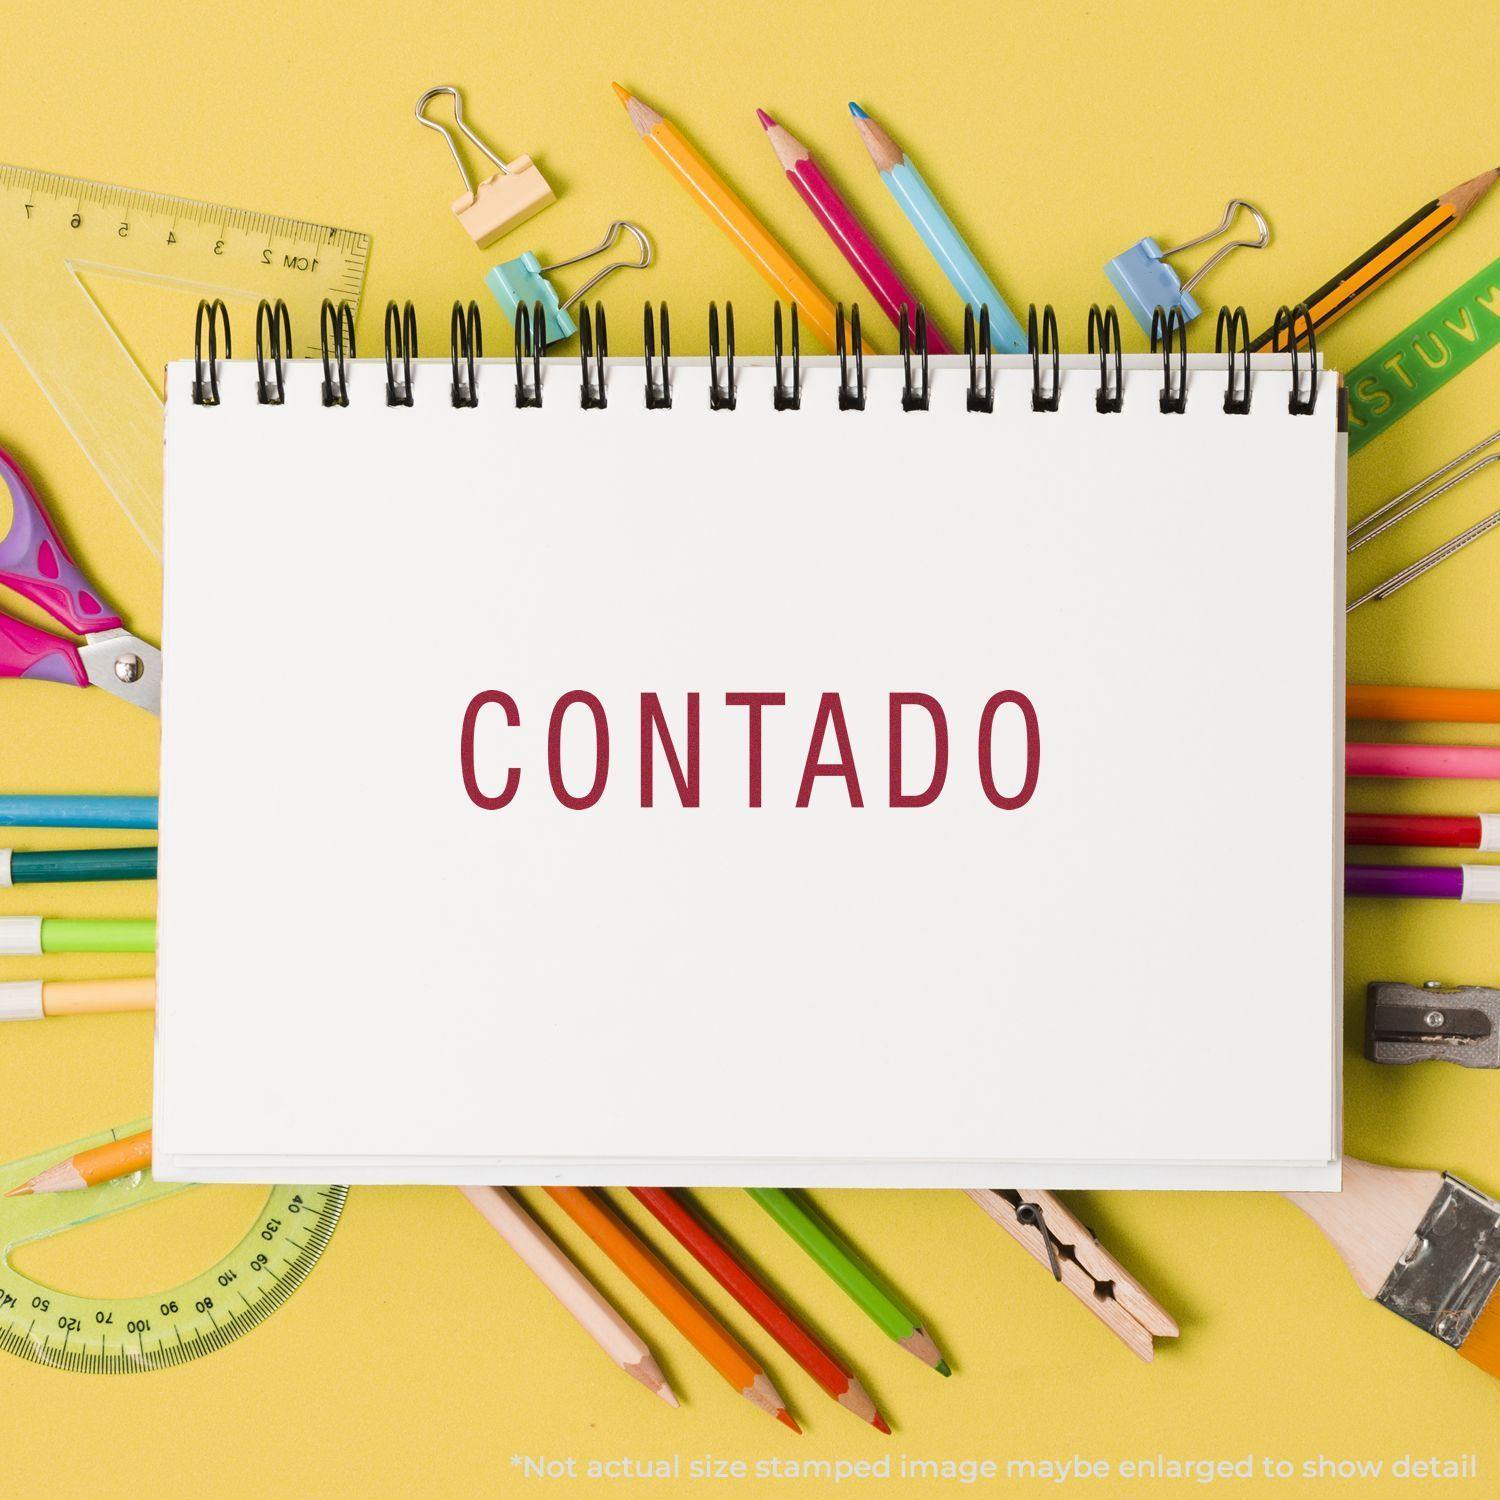 A self-inking stamp with a stamped image showing how the text "CONTADO" in a large font is displayed by it after stamping.